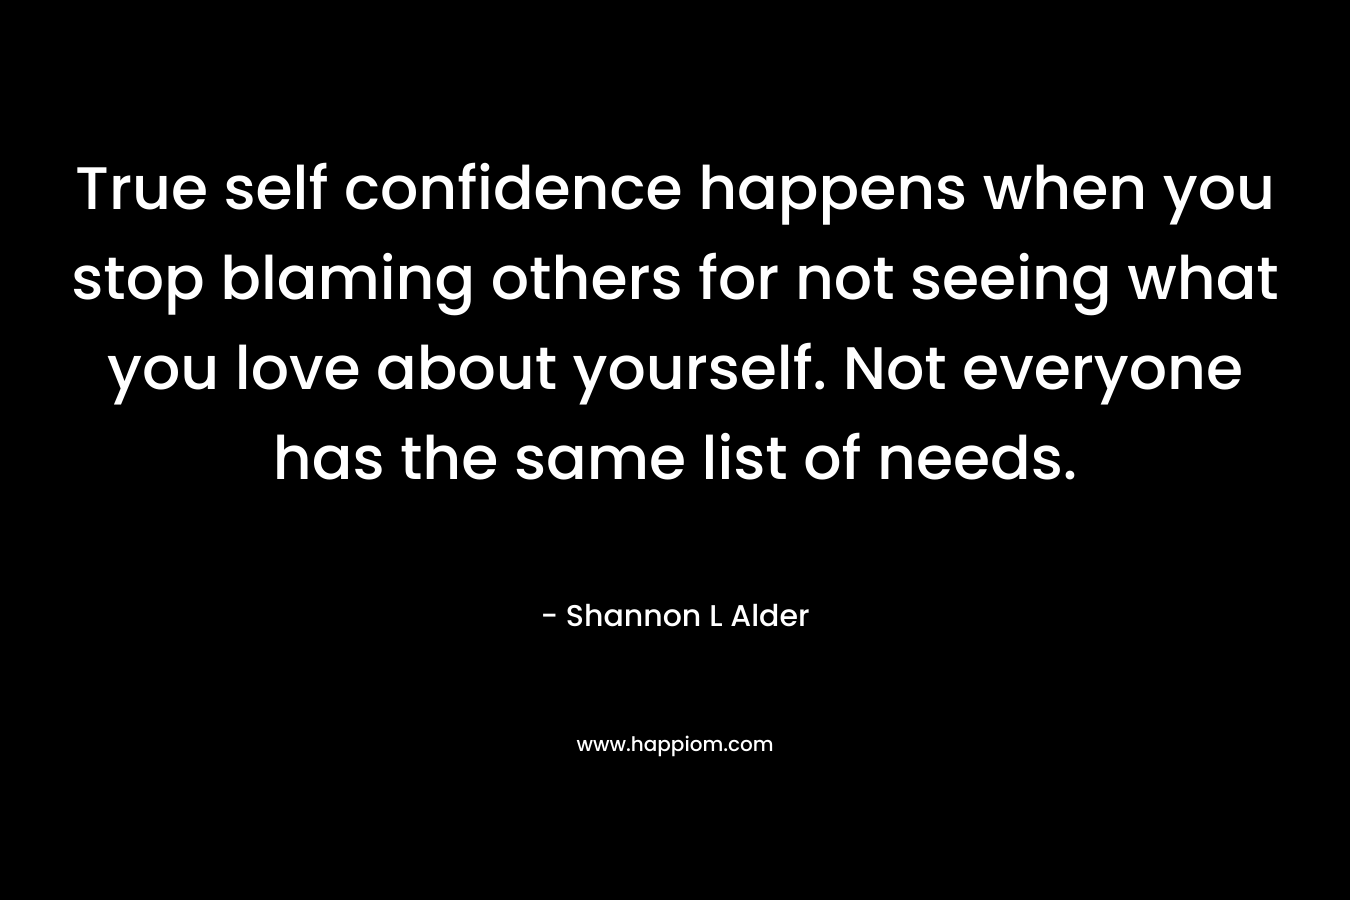 True self confidence happens when you stop blaming others for not seeing what you love about yourself. Not everyone has the same list of needs.